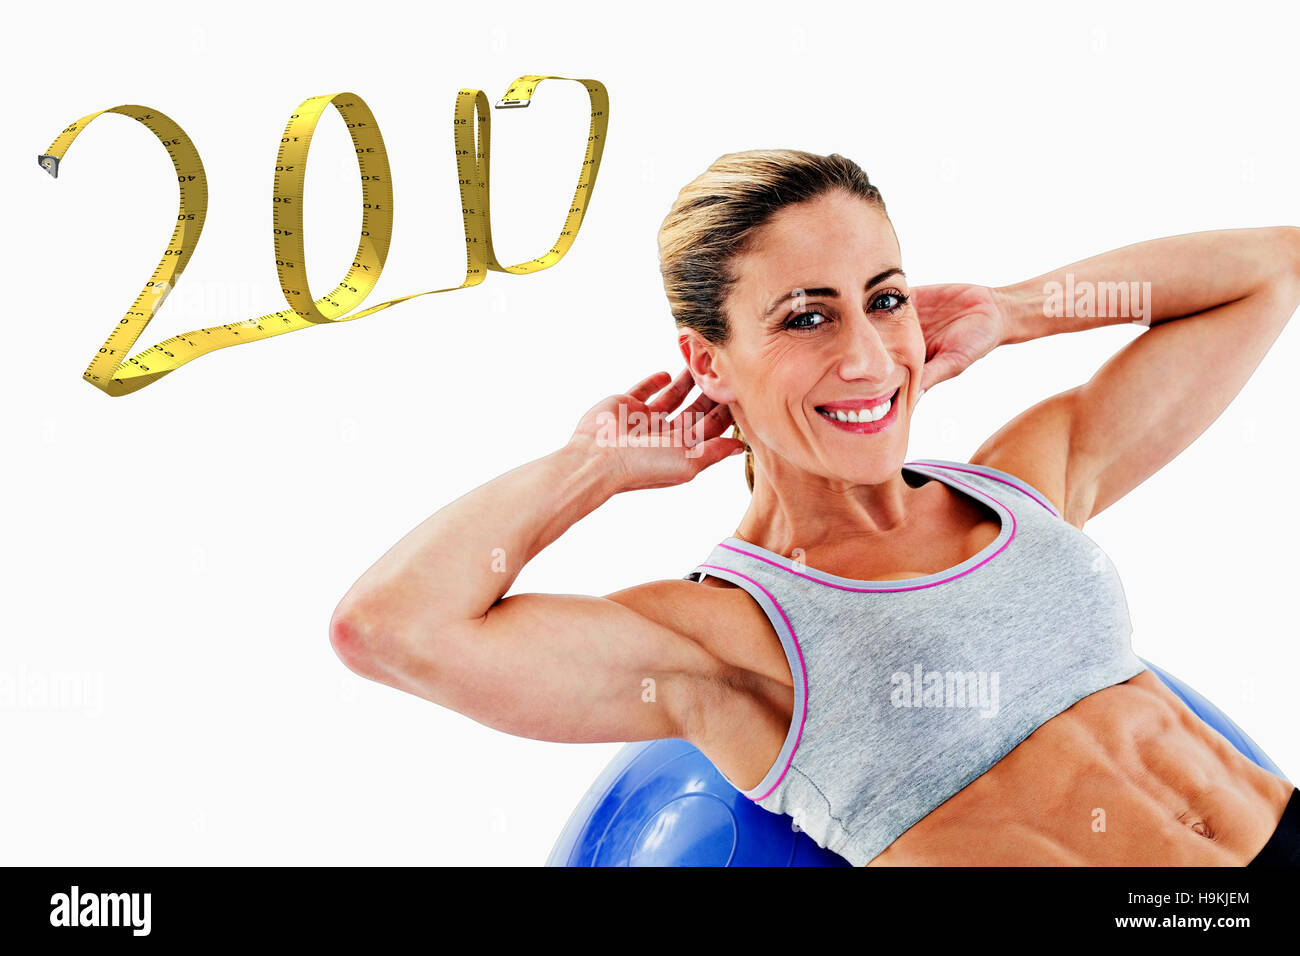 3D Composite image of fit woman doing sit ups on blue exercise ball smiling at camera Stock Photo